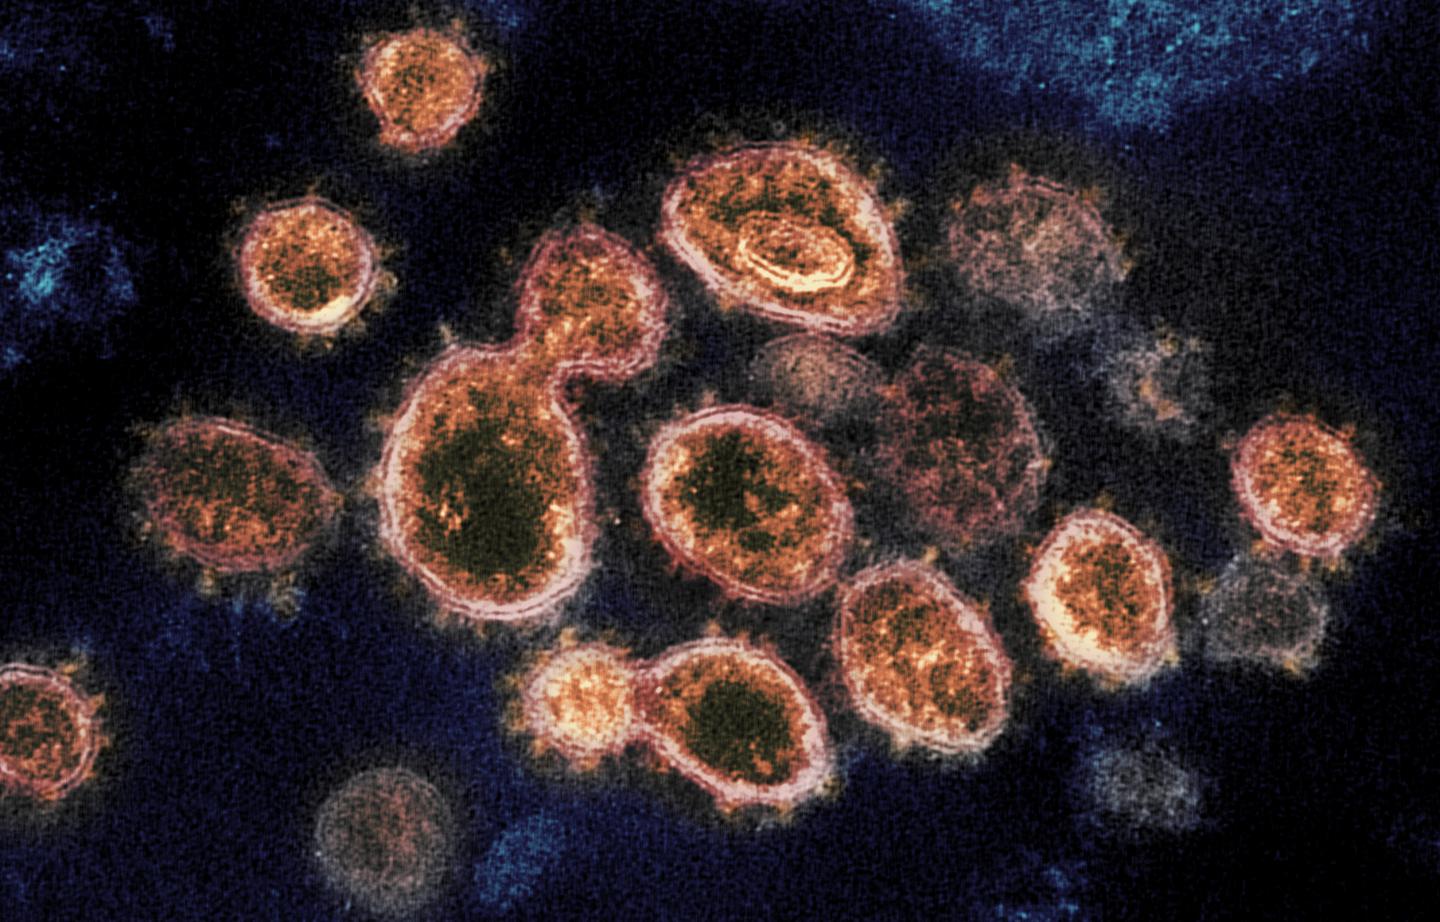 This transmission electron microscope image shows SARS-CoV-2 viruses